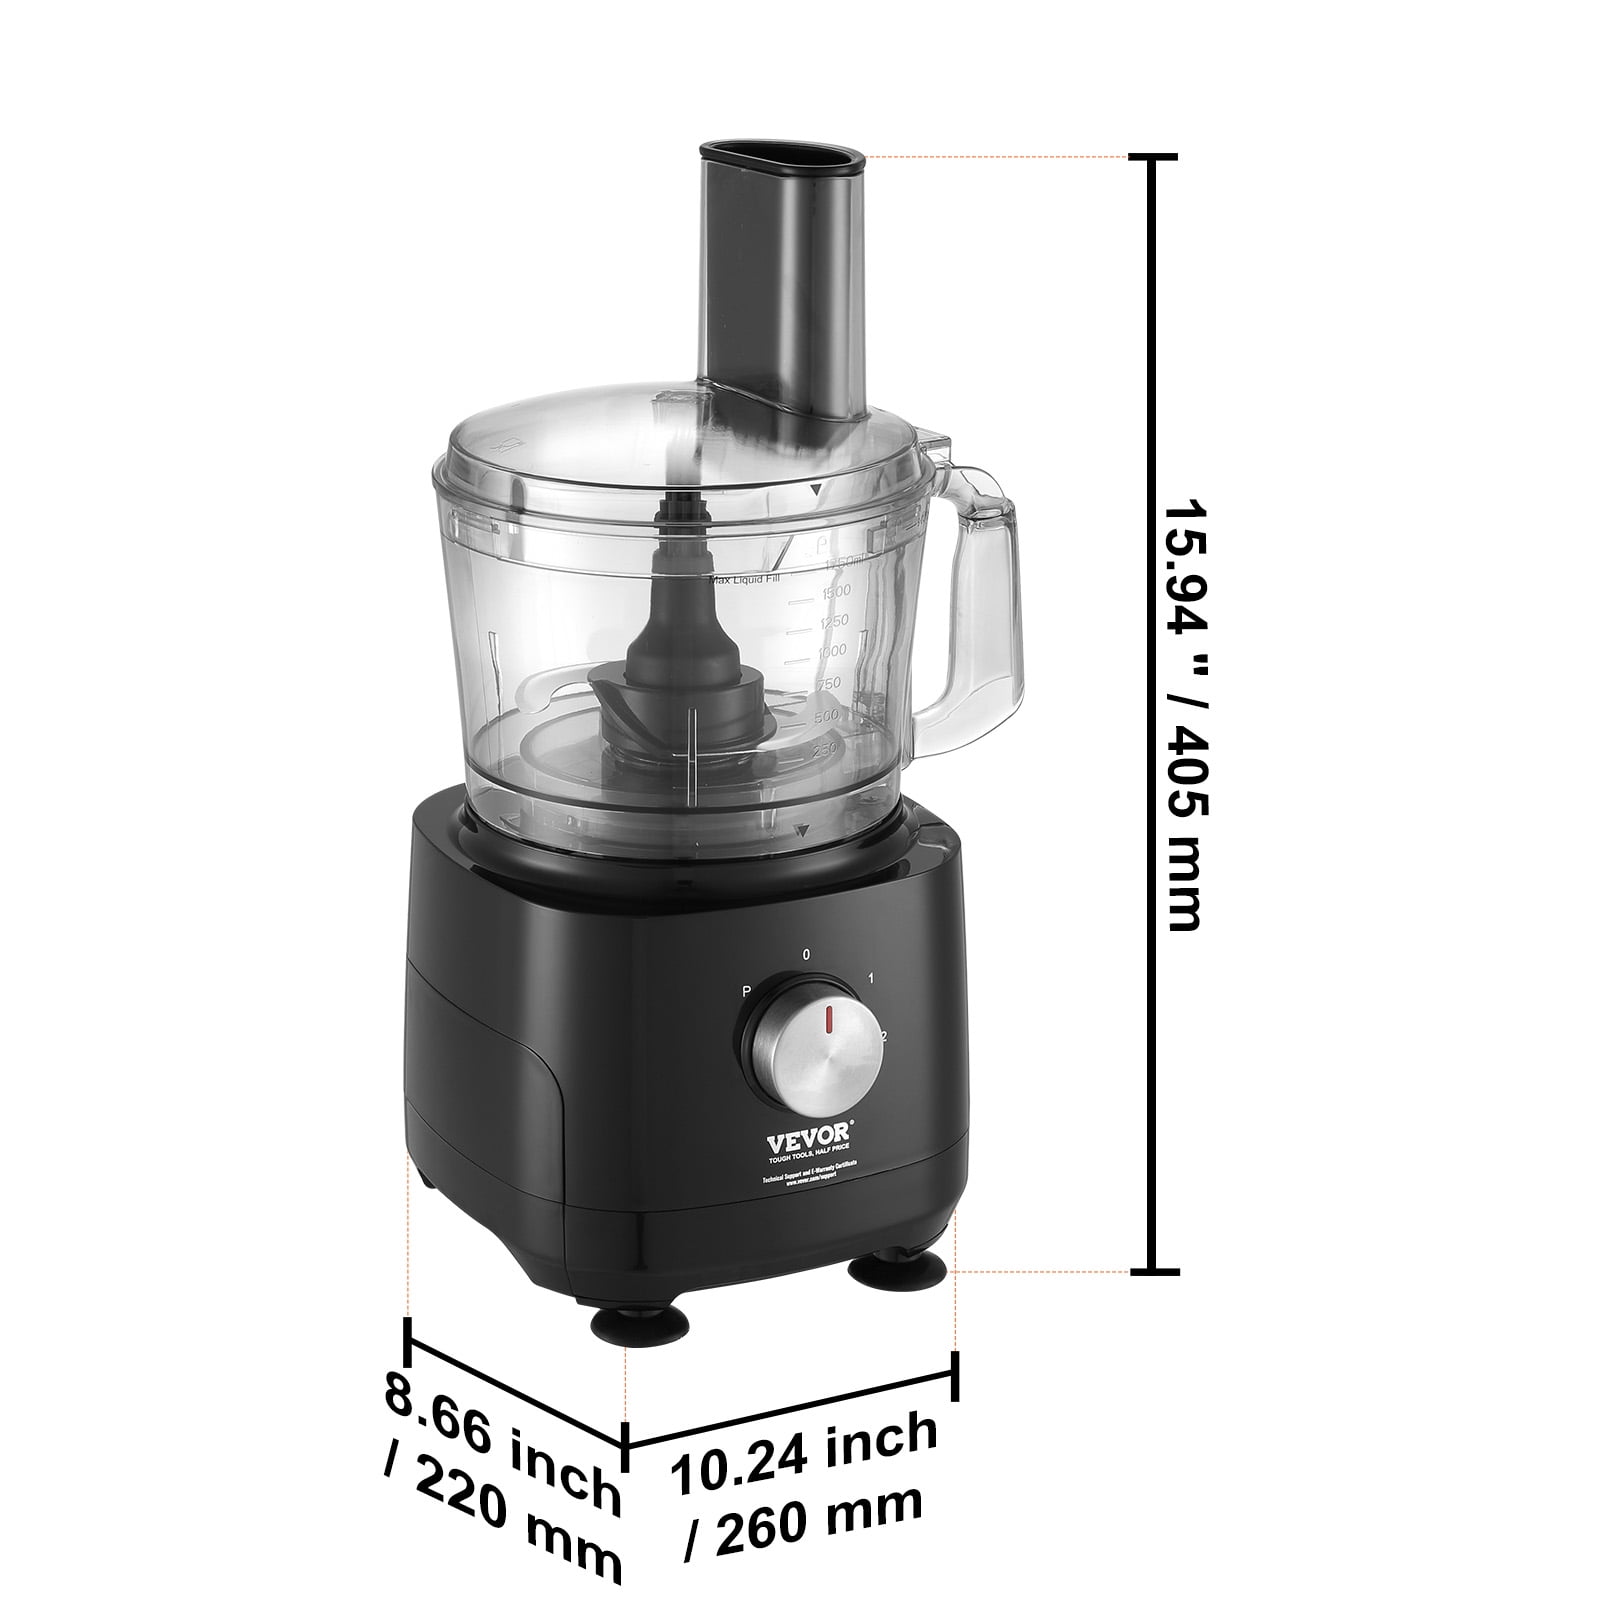  Davivy 12 Cup Food Processors, Professional Food Processor,6  Blades 9 Functions Vegetable Chopper for Home Use,Stepless Variable  Control,Black,600W (12-Cup Stainless Steel Bowl): Home & Kitchen